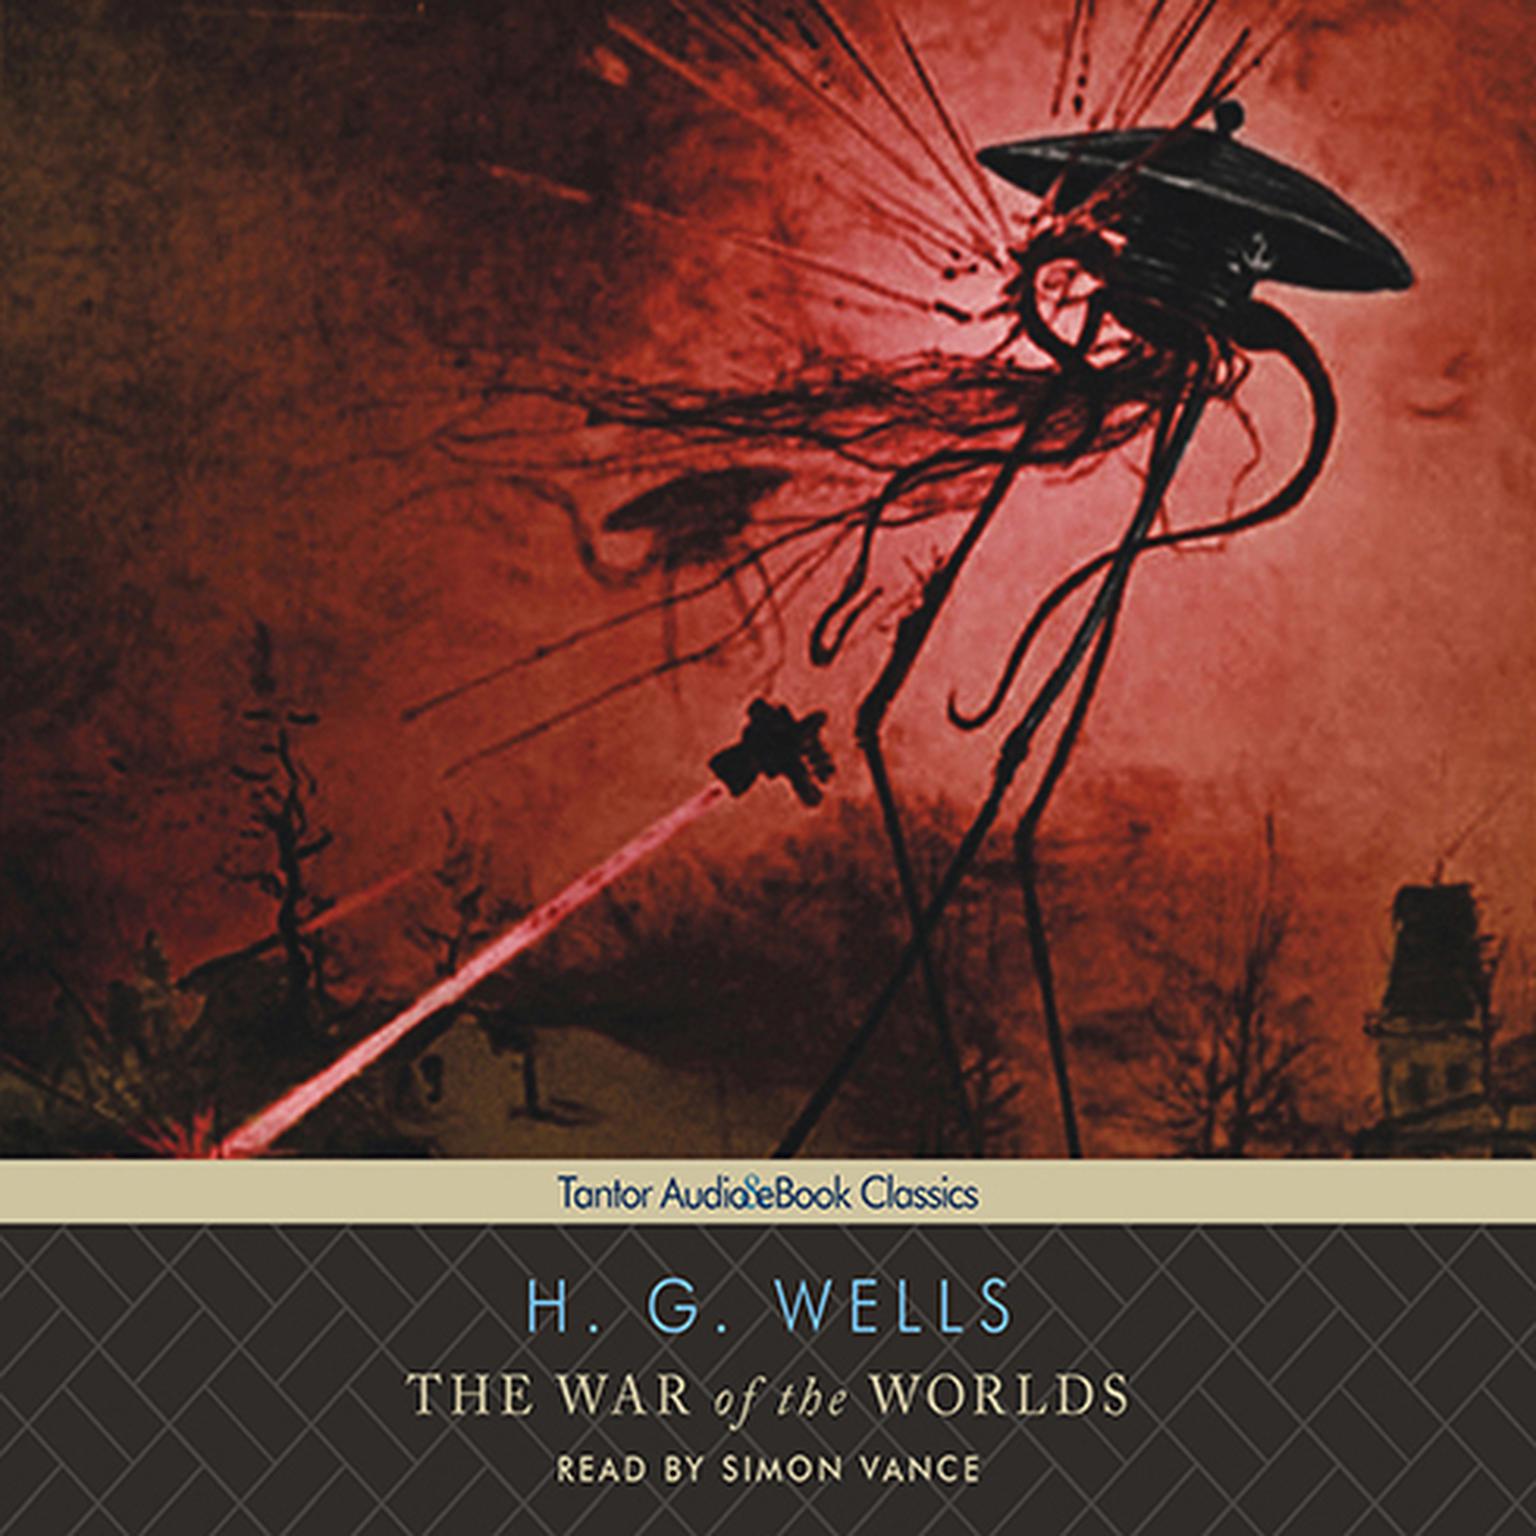 The War of the Worlds, with eBook Audiobook, by H. G. Wells